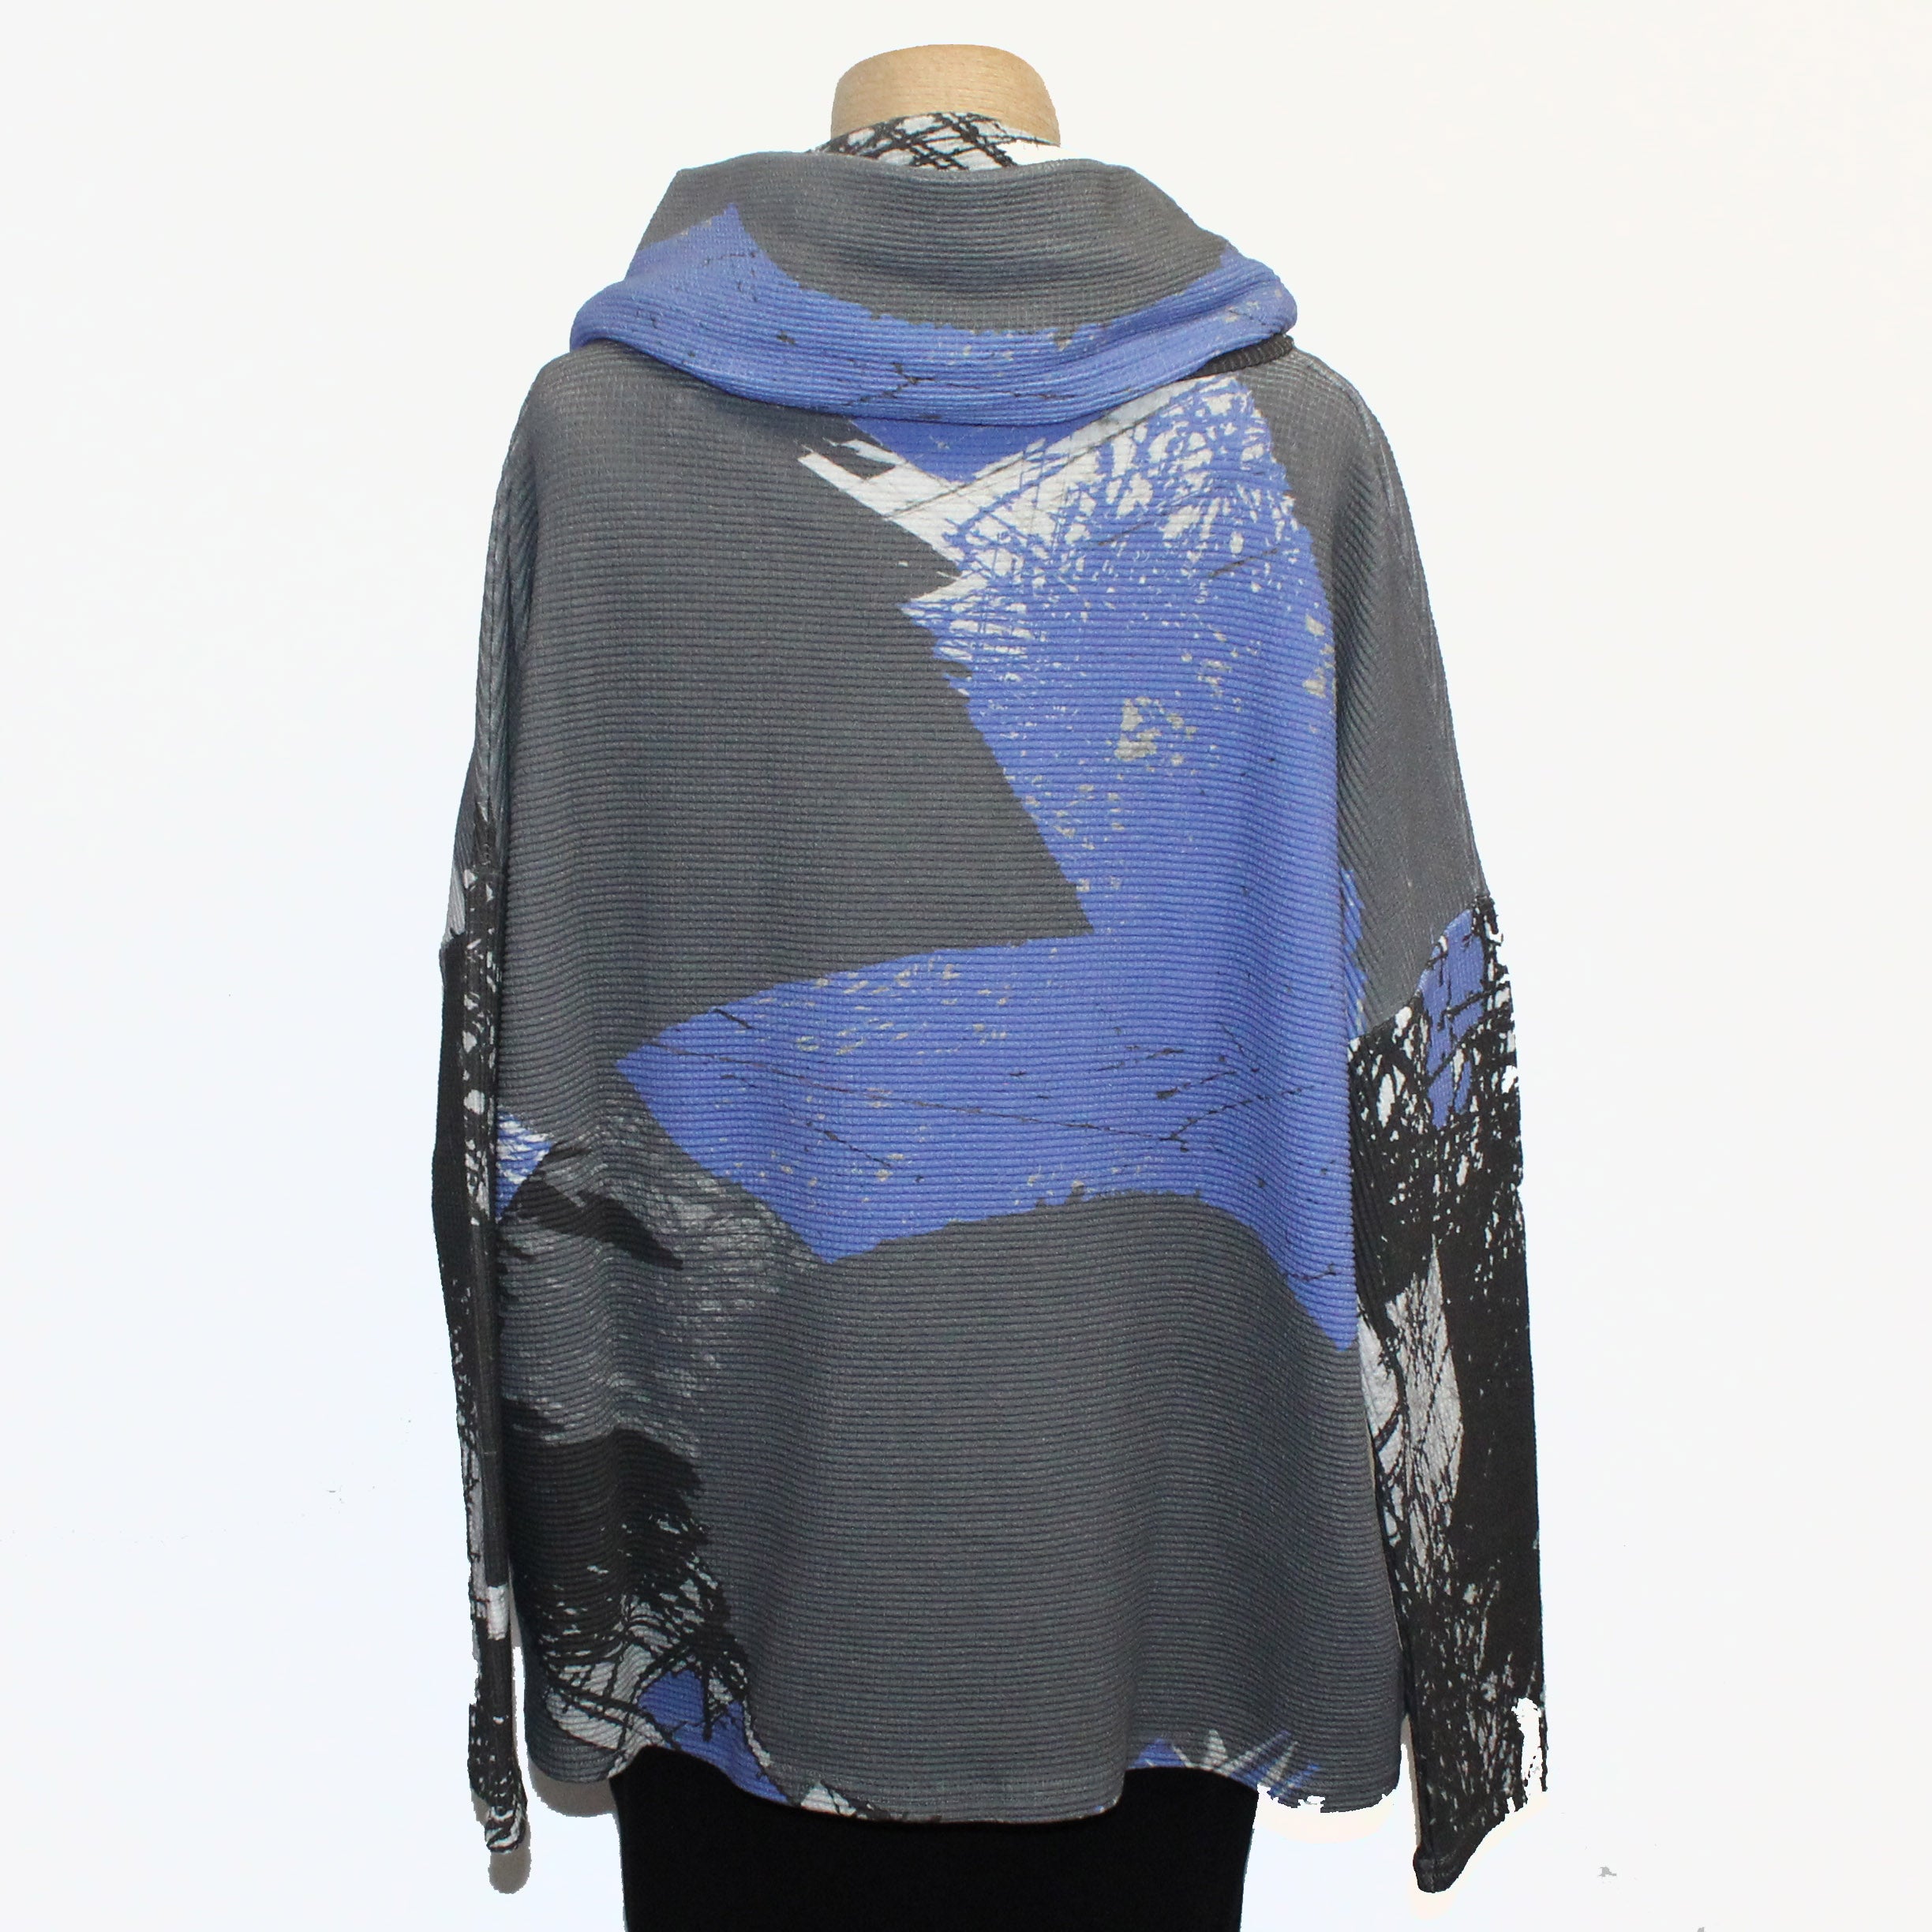 Andrea Geer Boxy Top With Scarf, Crop, Blue/Grey M/L & L/XL